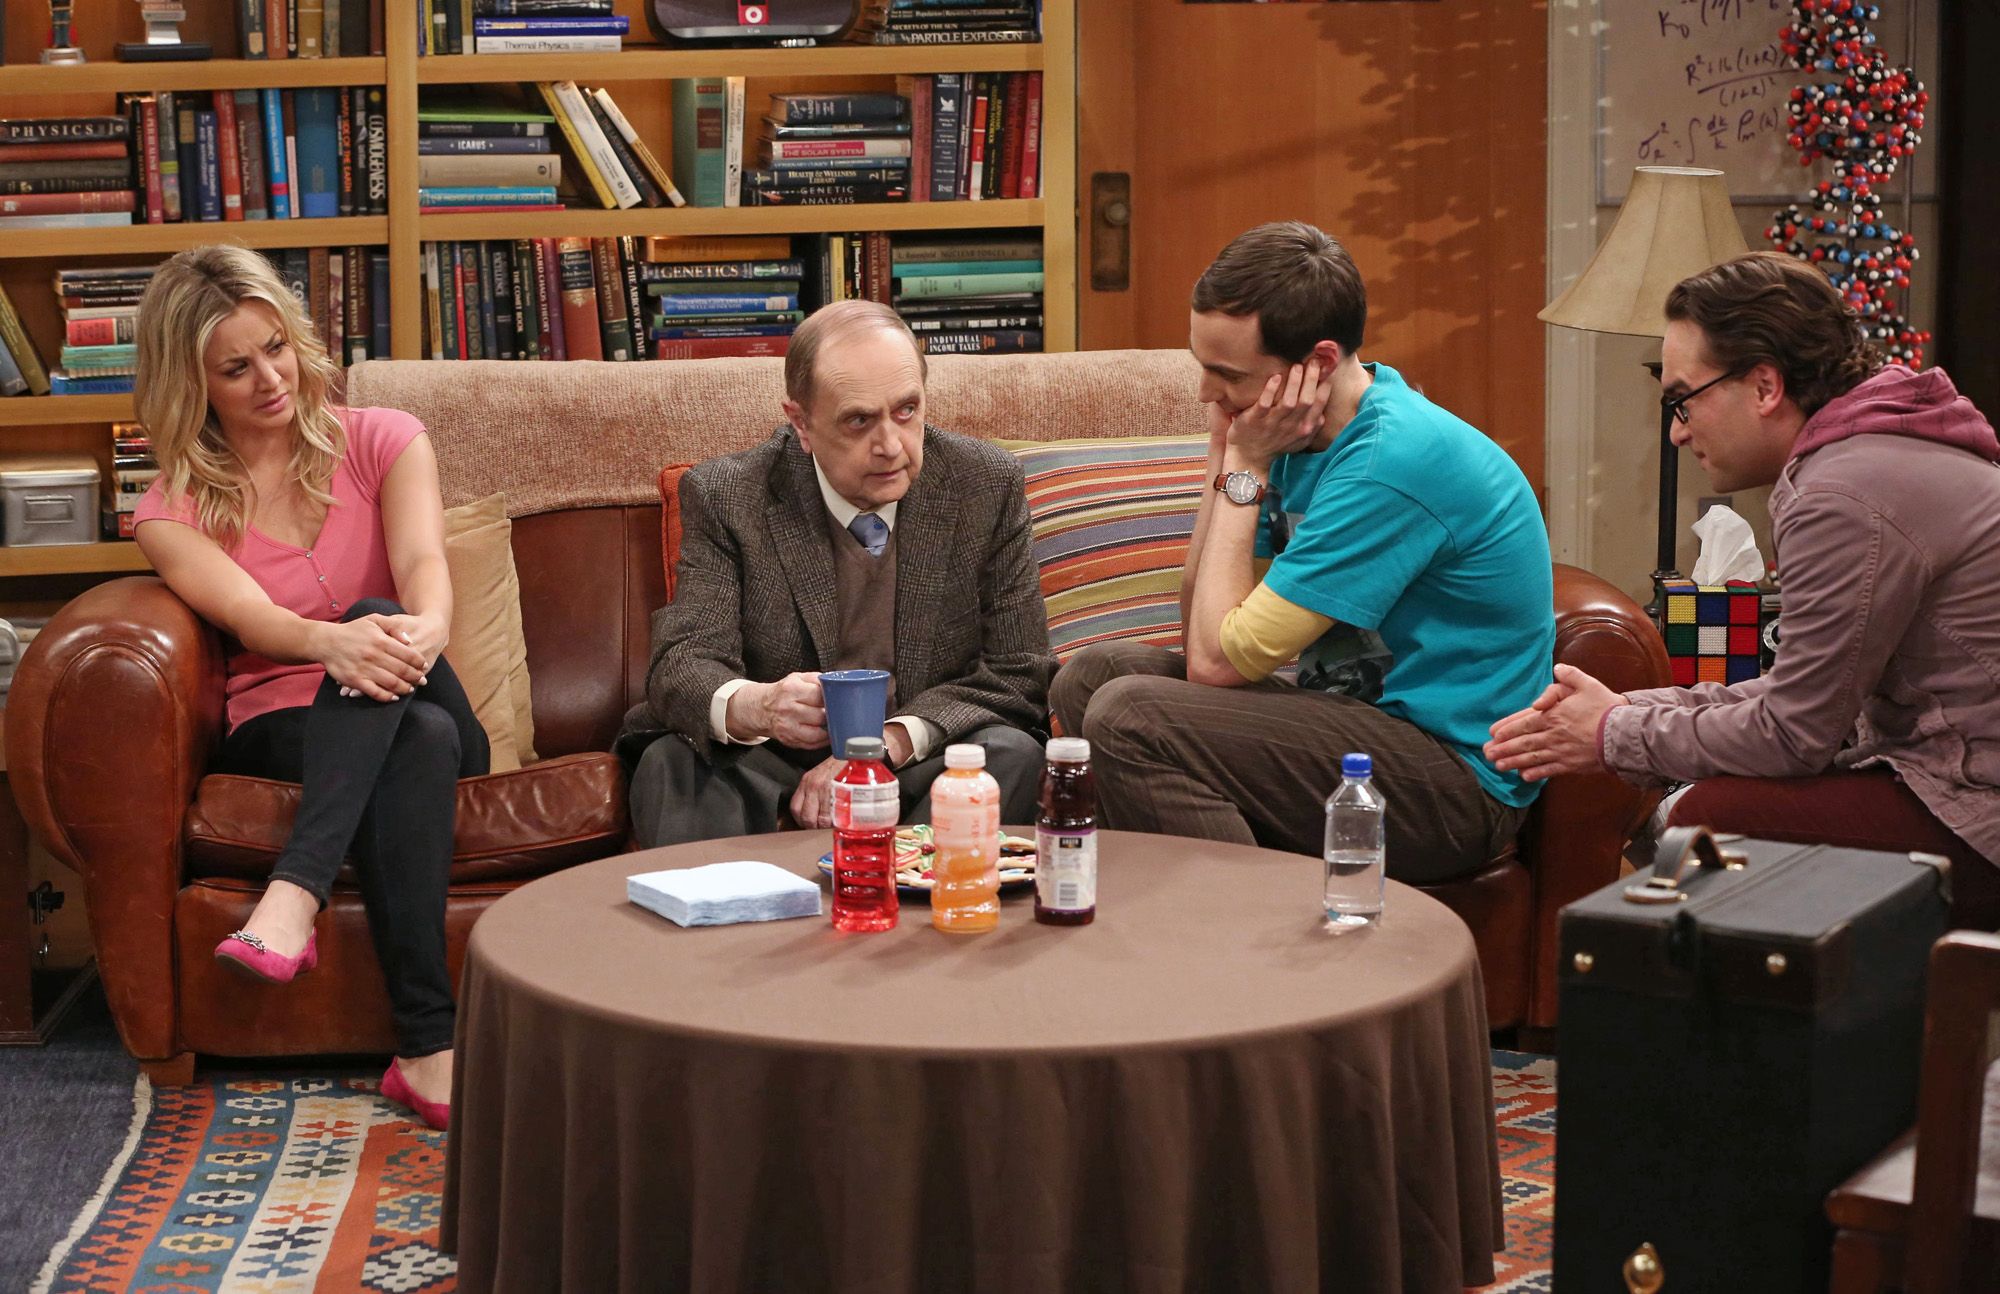 &quot;The Proton Resurgence&quot; -- Sheldon and Leonard hire Professor Proton, the host of their favorite childhood TV show, to perform, on THE BIG BANG THEORY, Thursday, May 2 (8:00 Ã¢ÂÂ 8:31 PM, ET/PT) on the CBS Television Network. Bob Newhart guest stars as Professor Proton. Pictured left to right: Kaley Cuoco, Bob Newhart, Jim Parsons and Johnny Galecki Photo: Michael Yarish/Warner Bros. ÃÂ©2013 Warner Bros. Television. All Rights Reserved.